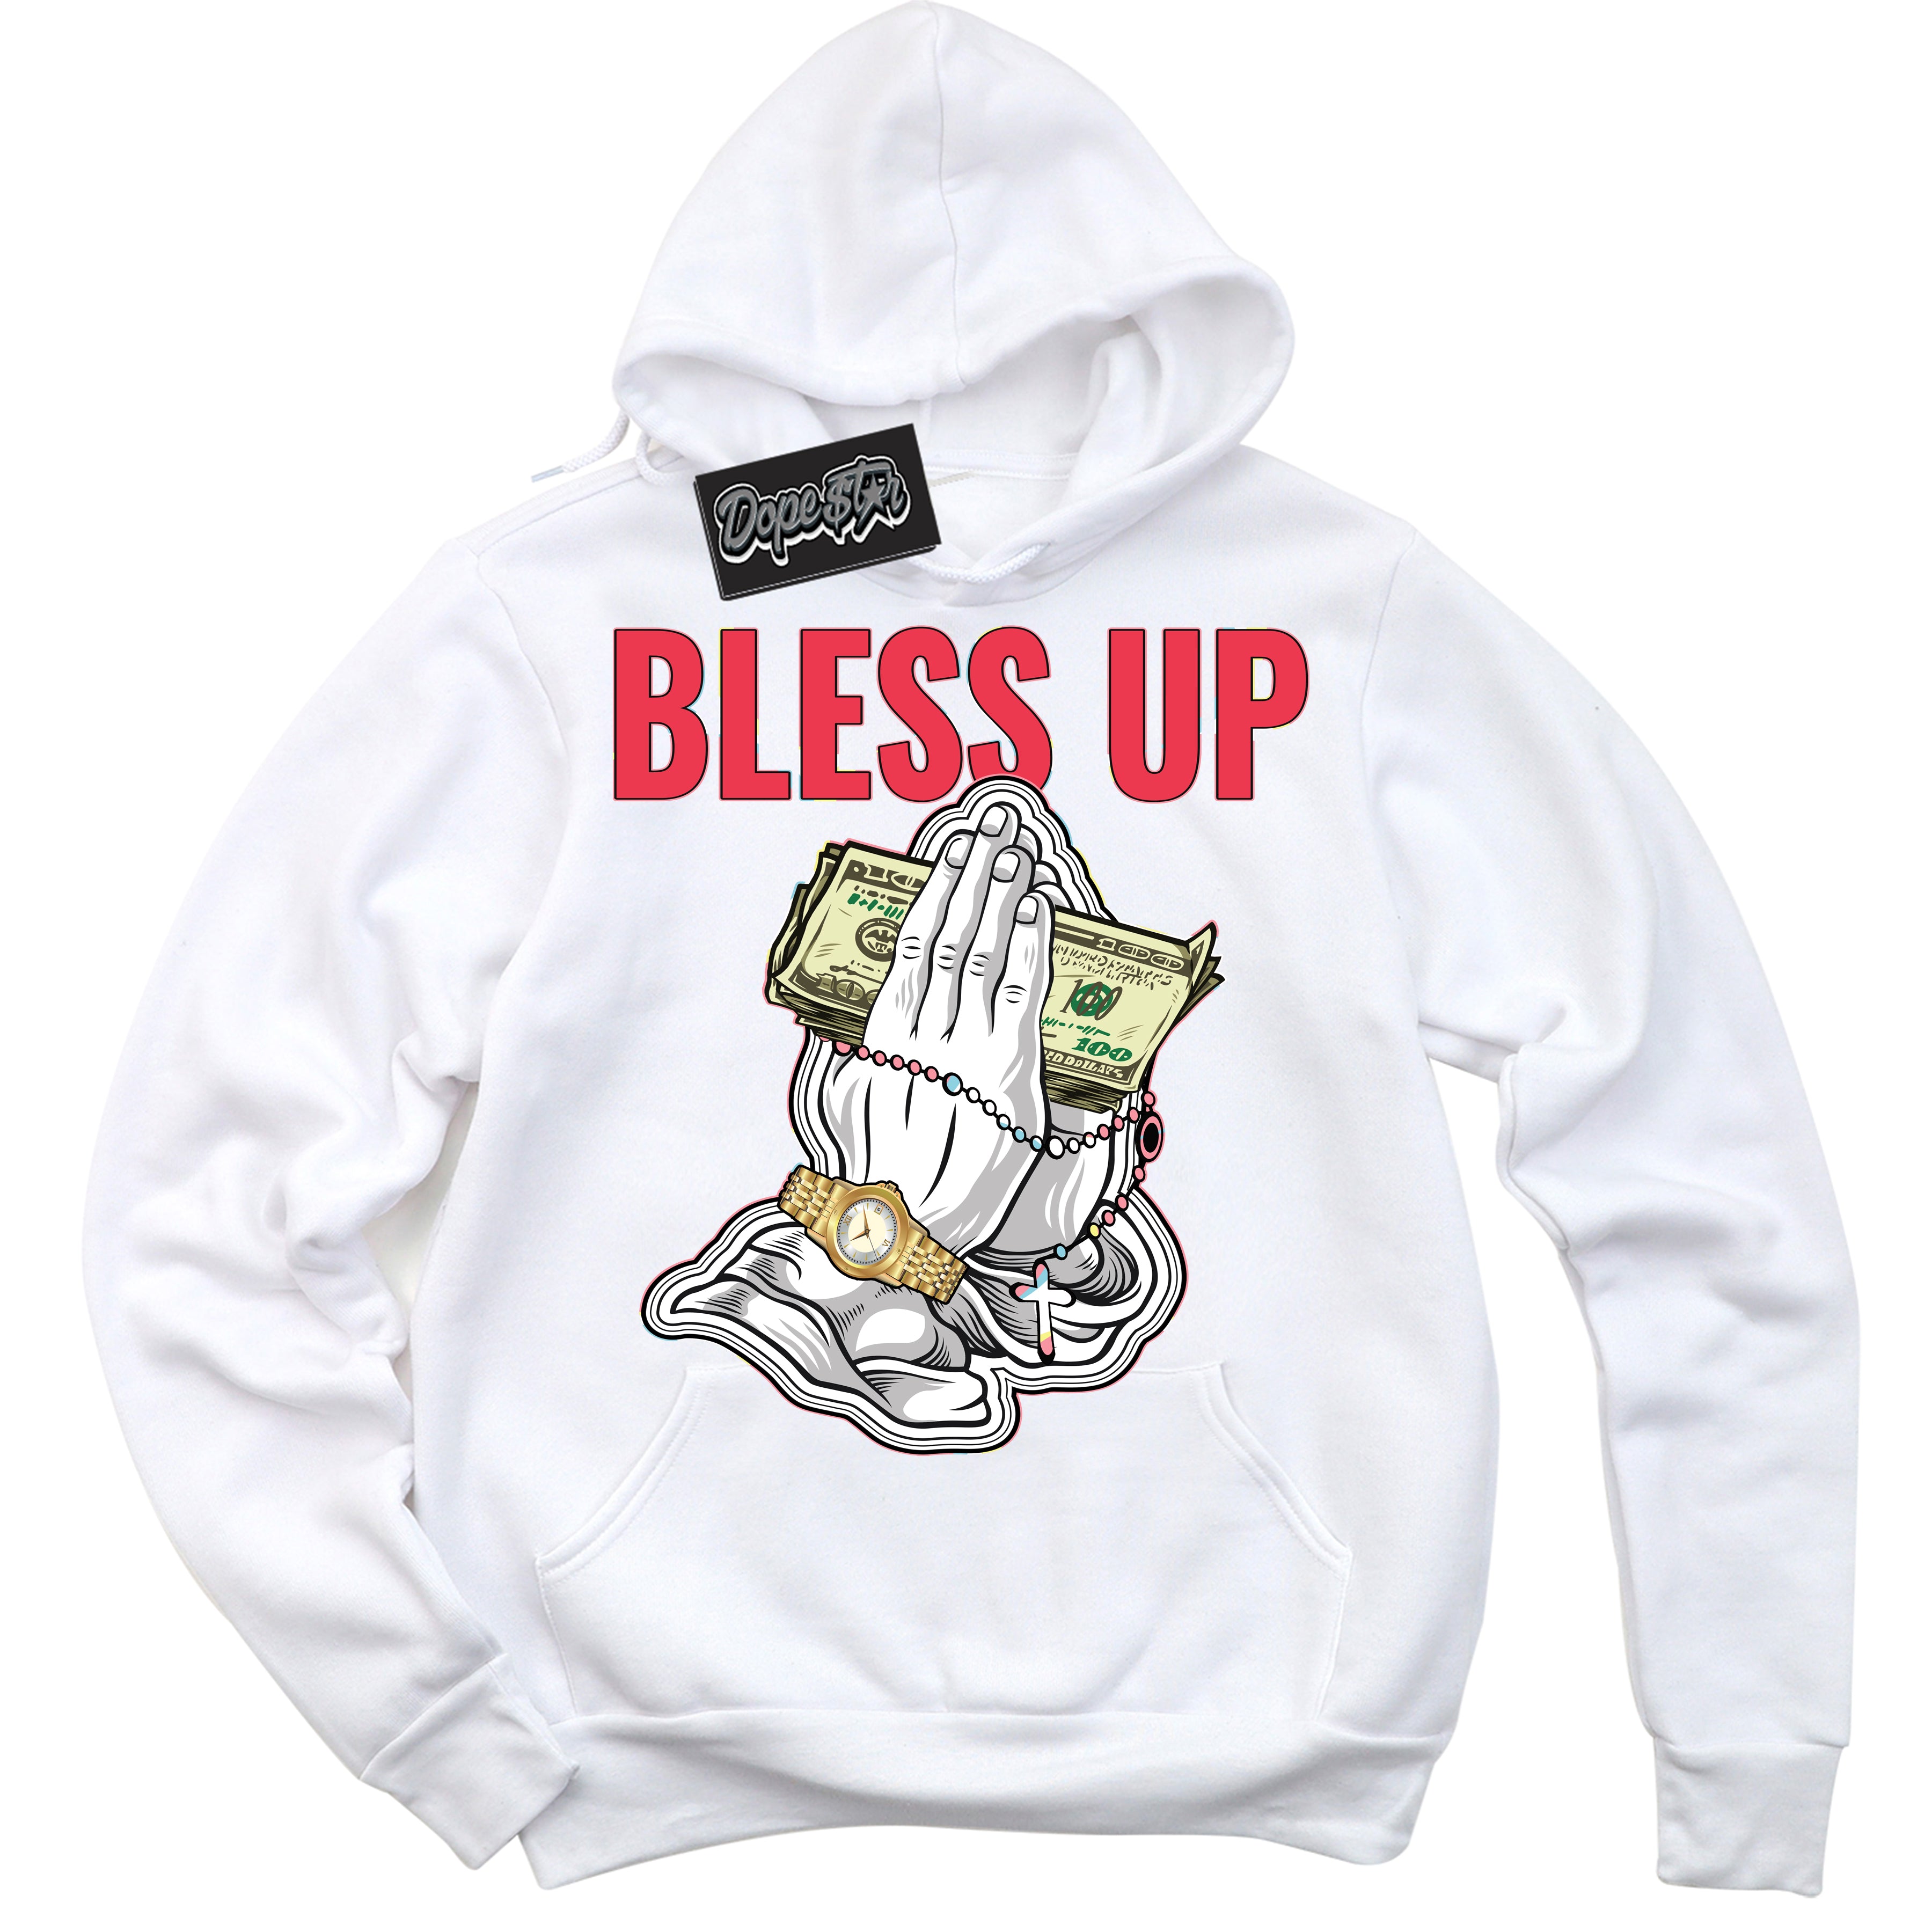 Cool White Graphic DopeStar Hoodie with “ Bless Up “ print, that perfectly matches Spider-Verse 1s sneakers